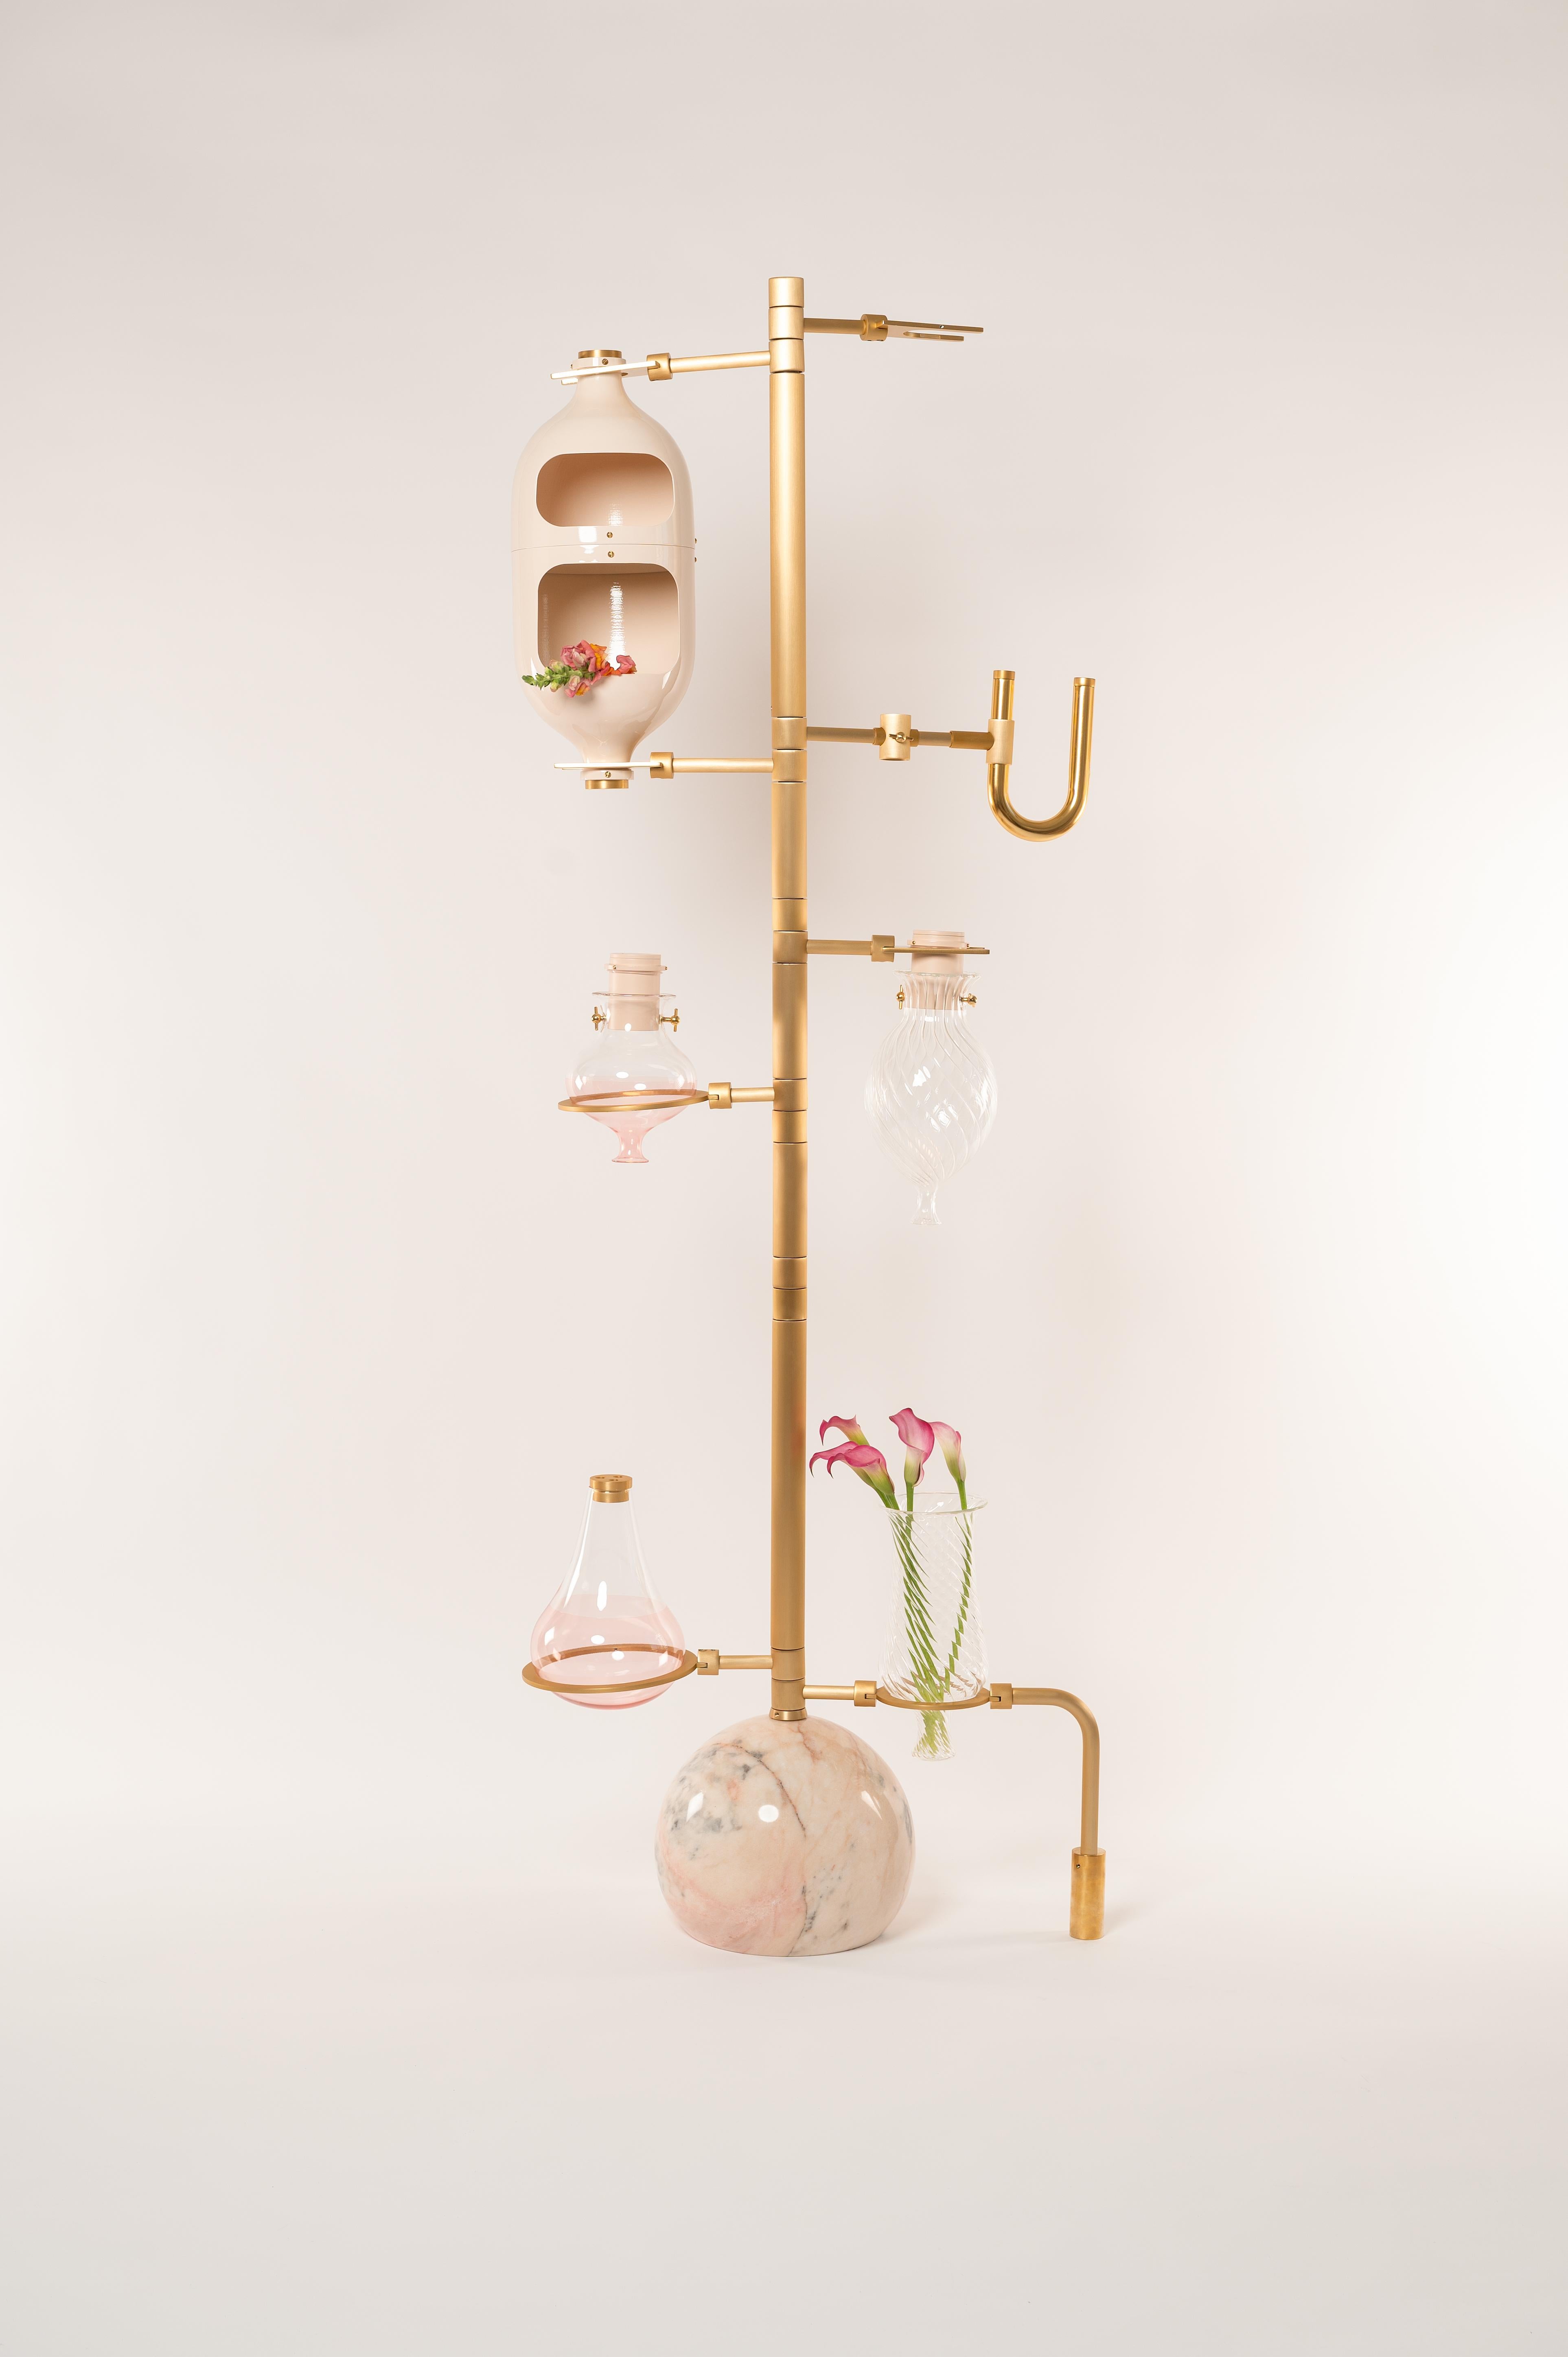 Beige Emotional Lab Floor Lamp by Hania Jneid
Dimensions: W 100 x D 100 x H 190 cm
Materials: Anodised Aluminum, screws and components in brass or Rosa Portugal Marble.

The Emotional Lab is a multifunctional sculptural art piece, that encompass-es